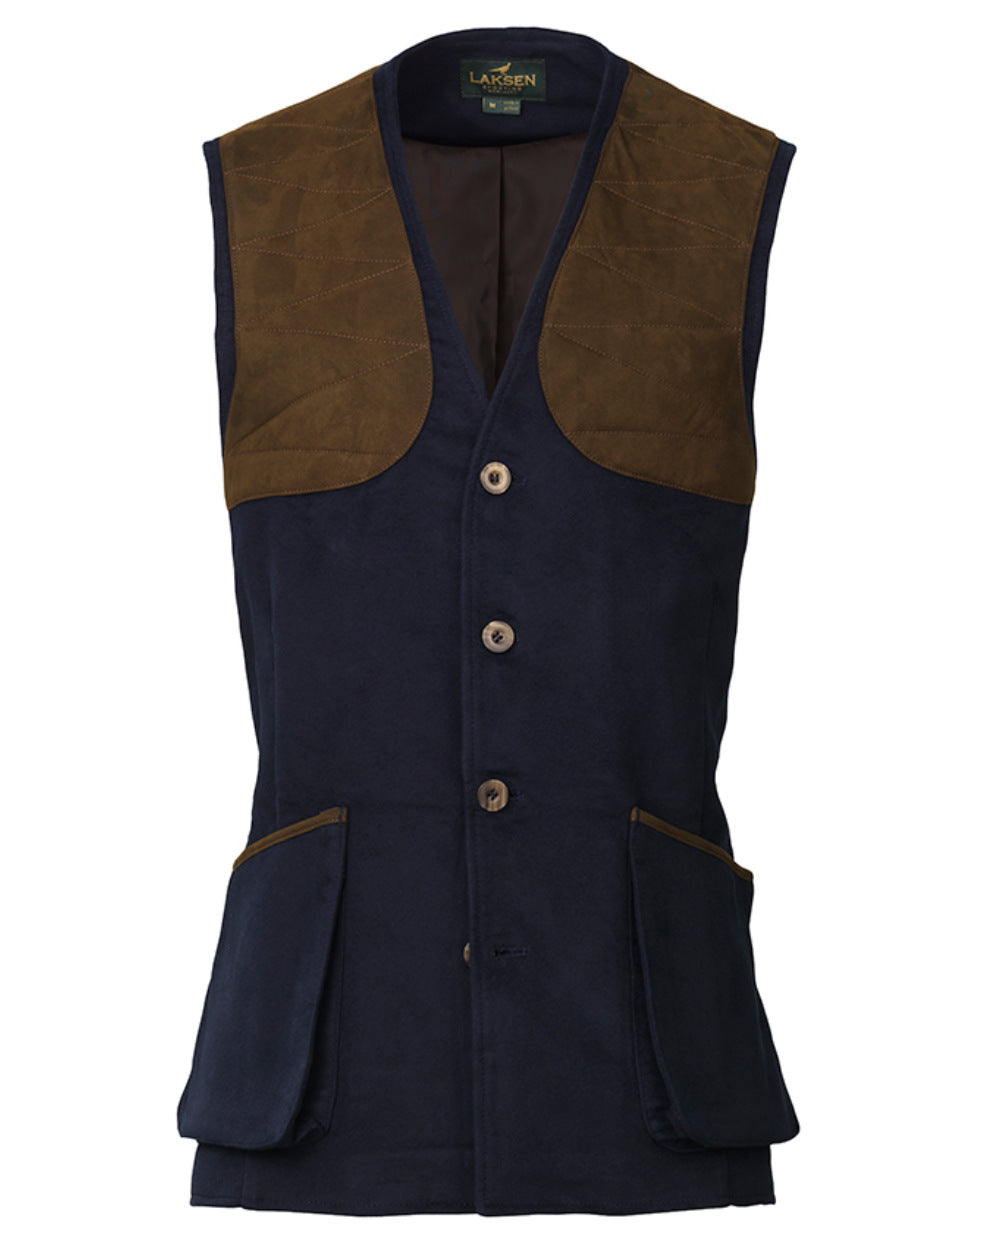 Navy Coloured Laksen Belgravia Leith Shooting Vest On A White Background 